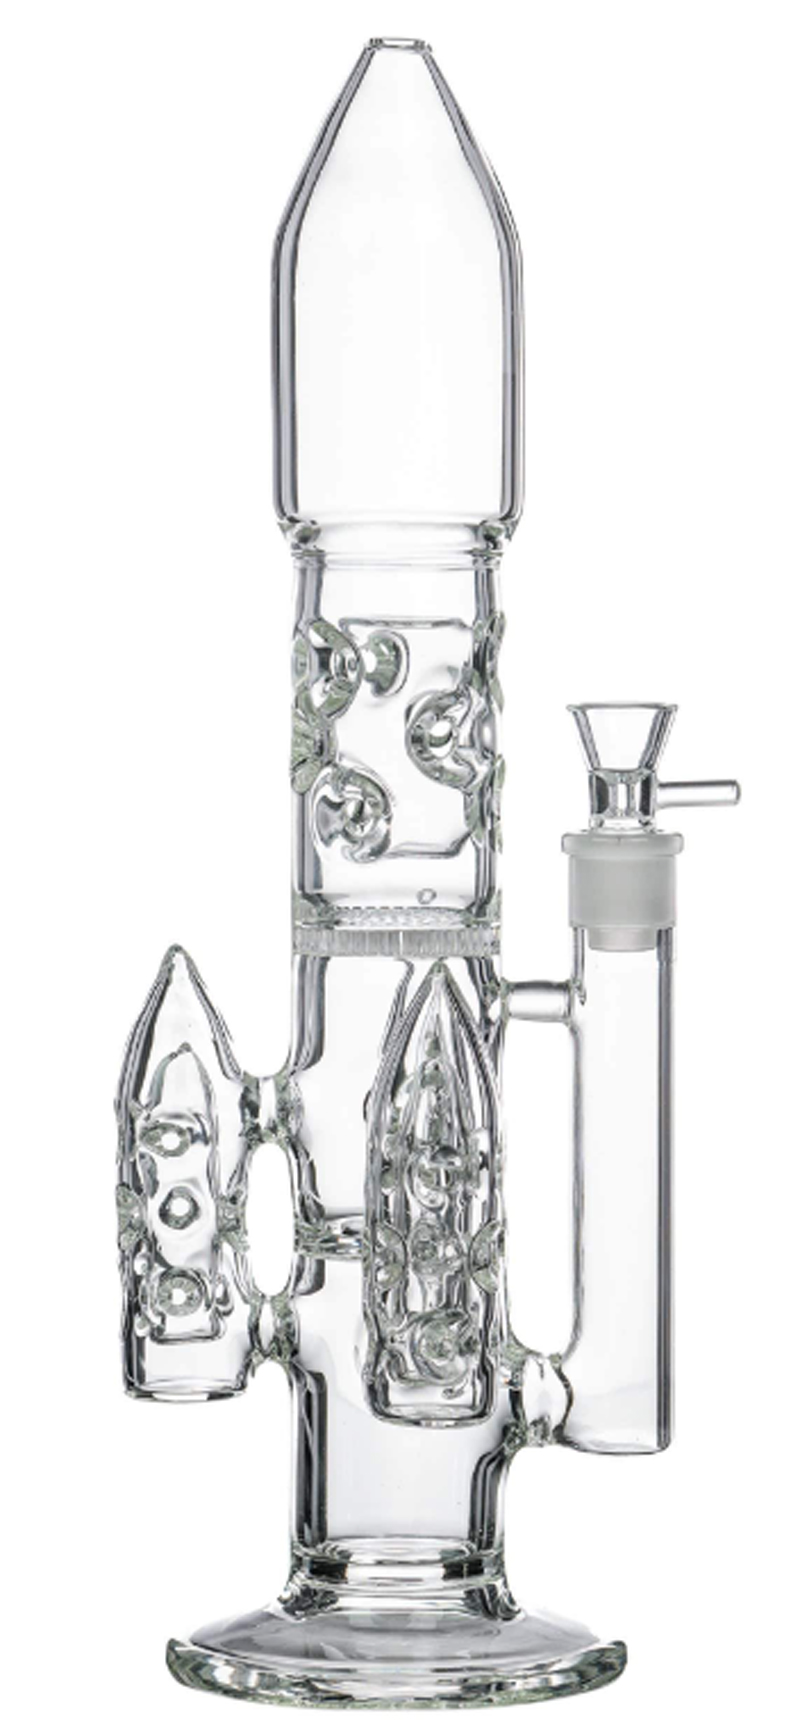 Vintage Swiss Perc Rocket Glass Bong Hookah Water Smoking Pipe 16inch Height 18mm Joint can put customer logo by DHL UPS CNE